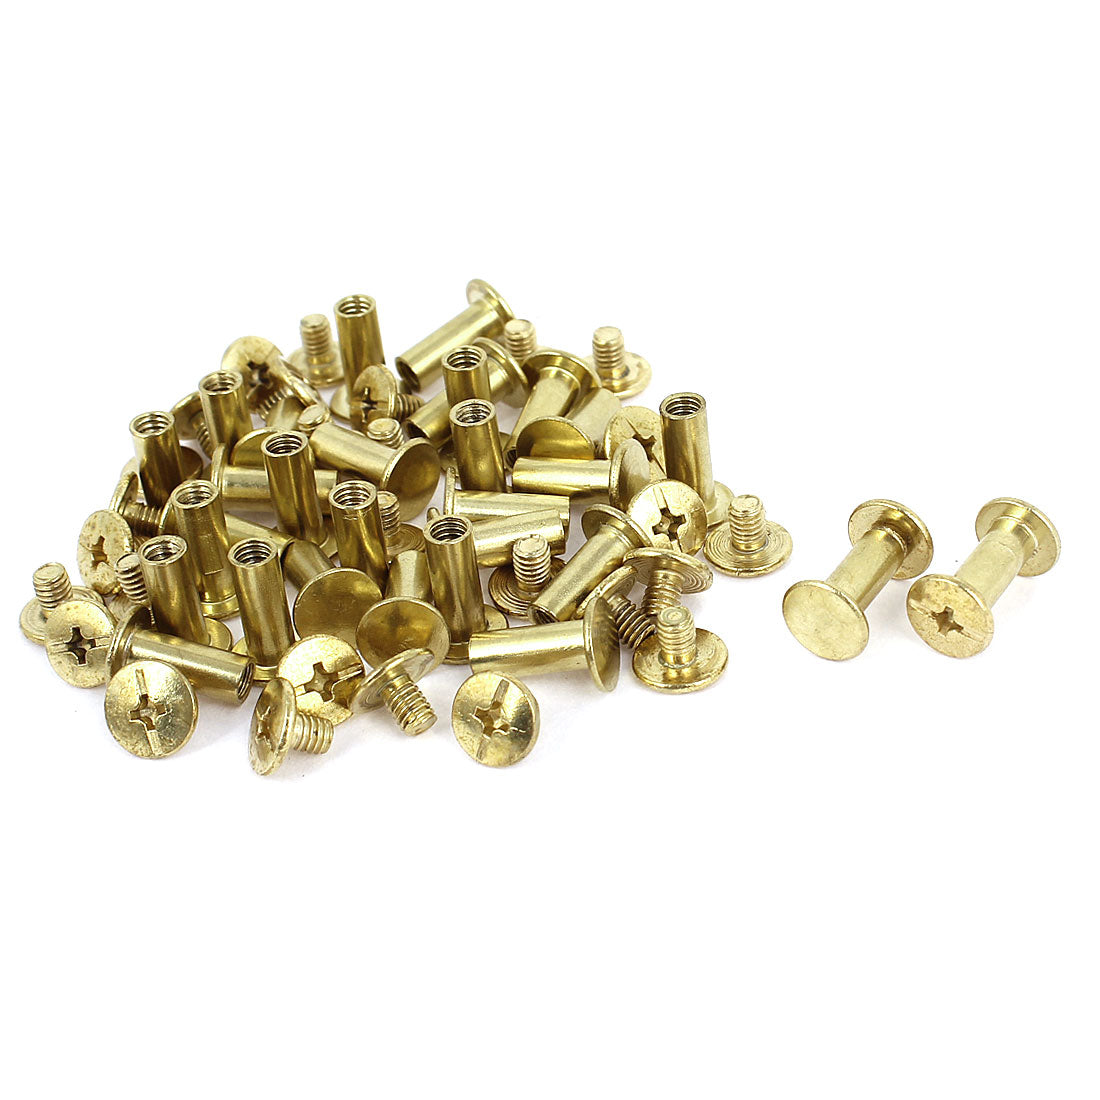 uxcell Uxcell Brass Plated 5x12mm Binding Chicago Screw Post 30pcs for Albums Scrapbook